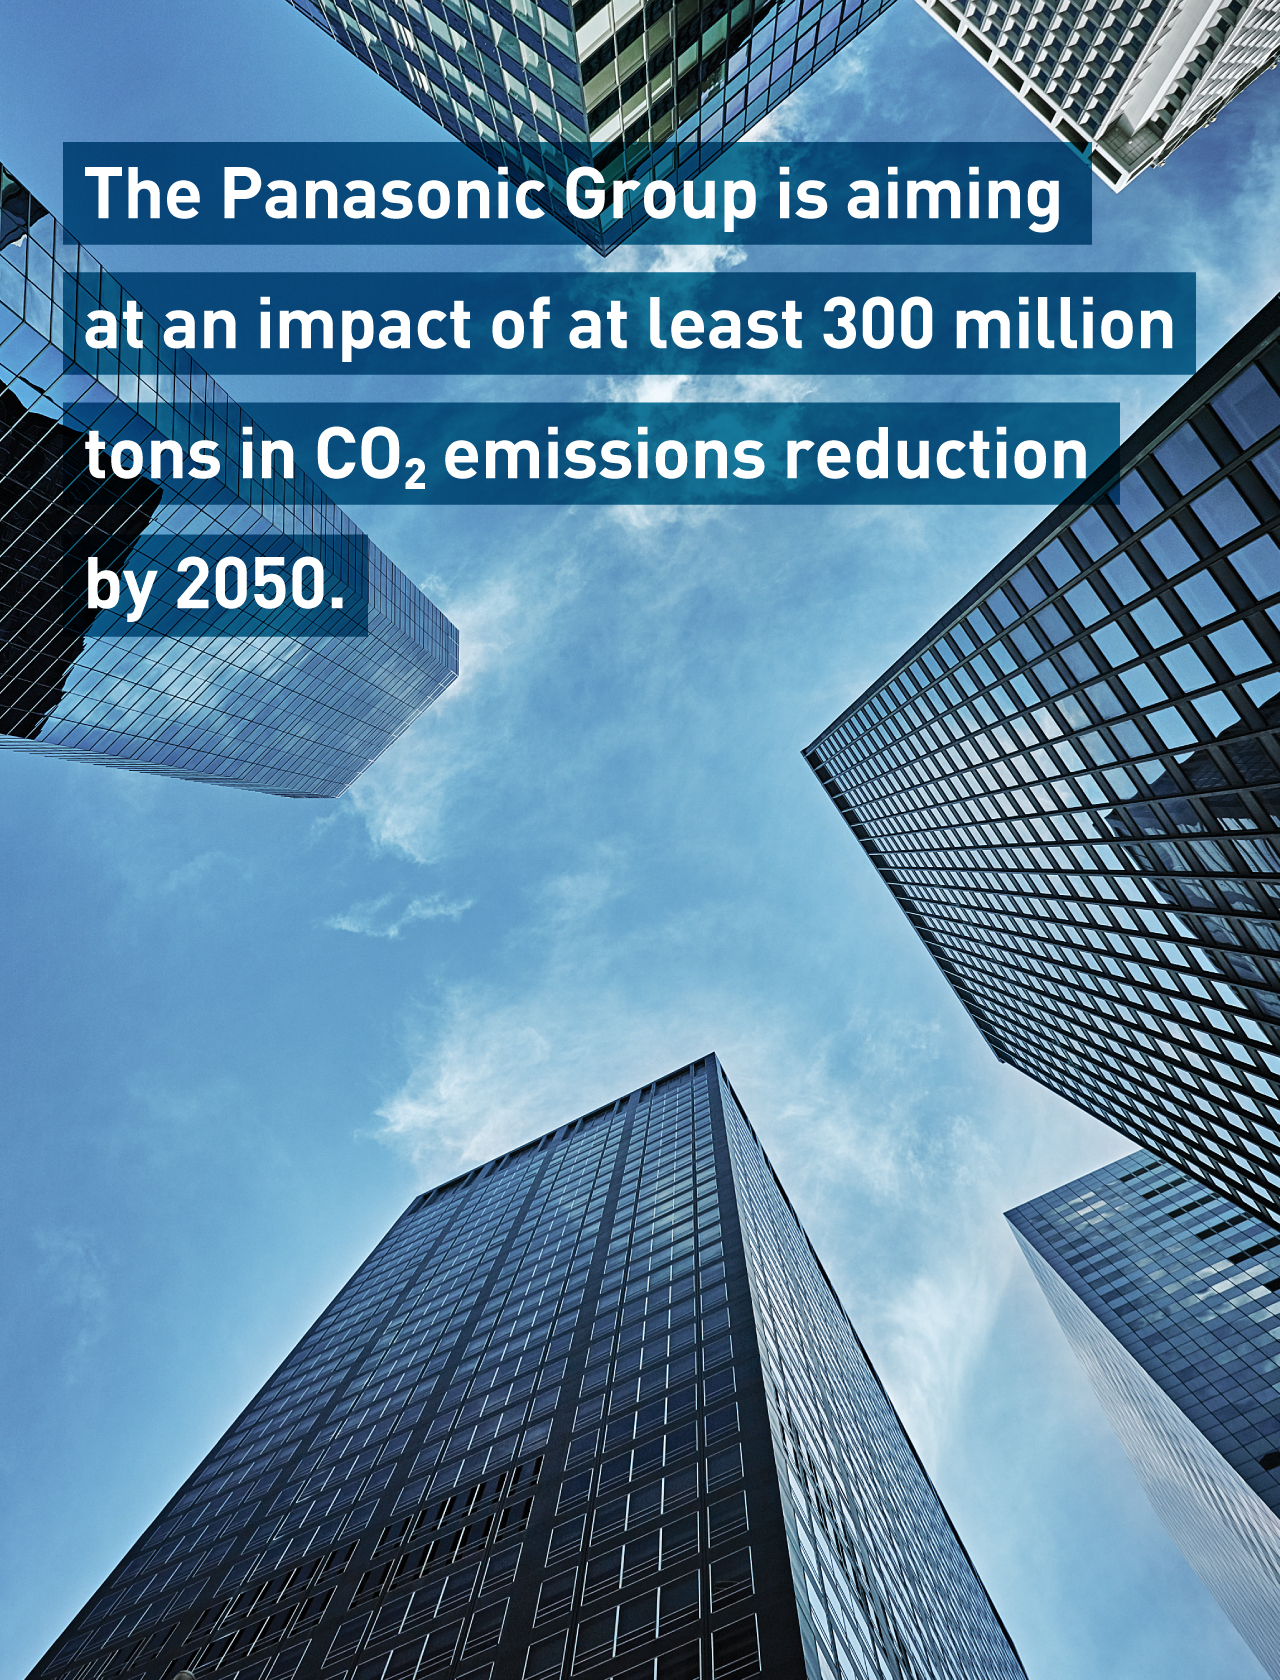 The Panasonic Group aims to reduce CO2 emissions by at least 300 million tons by 2050. 